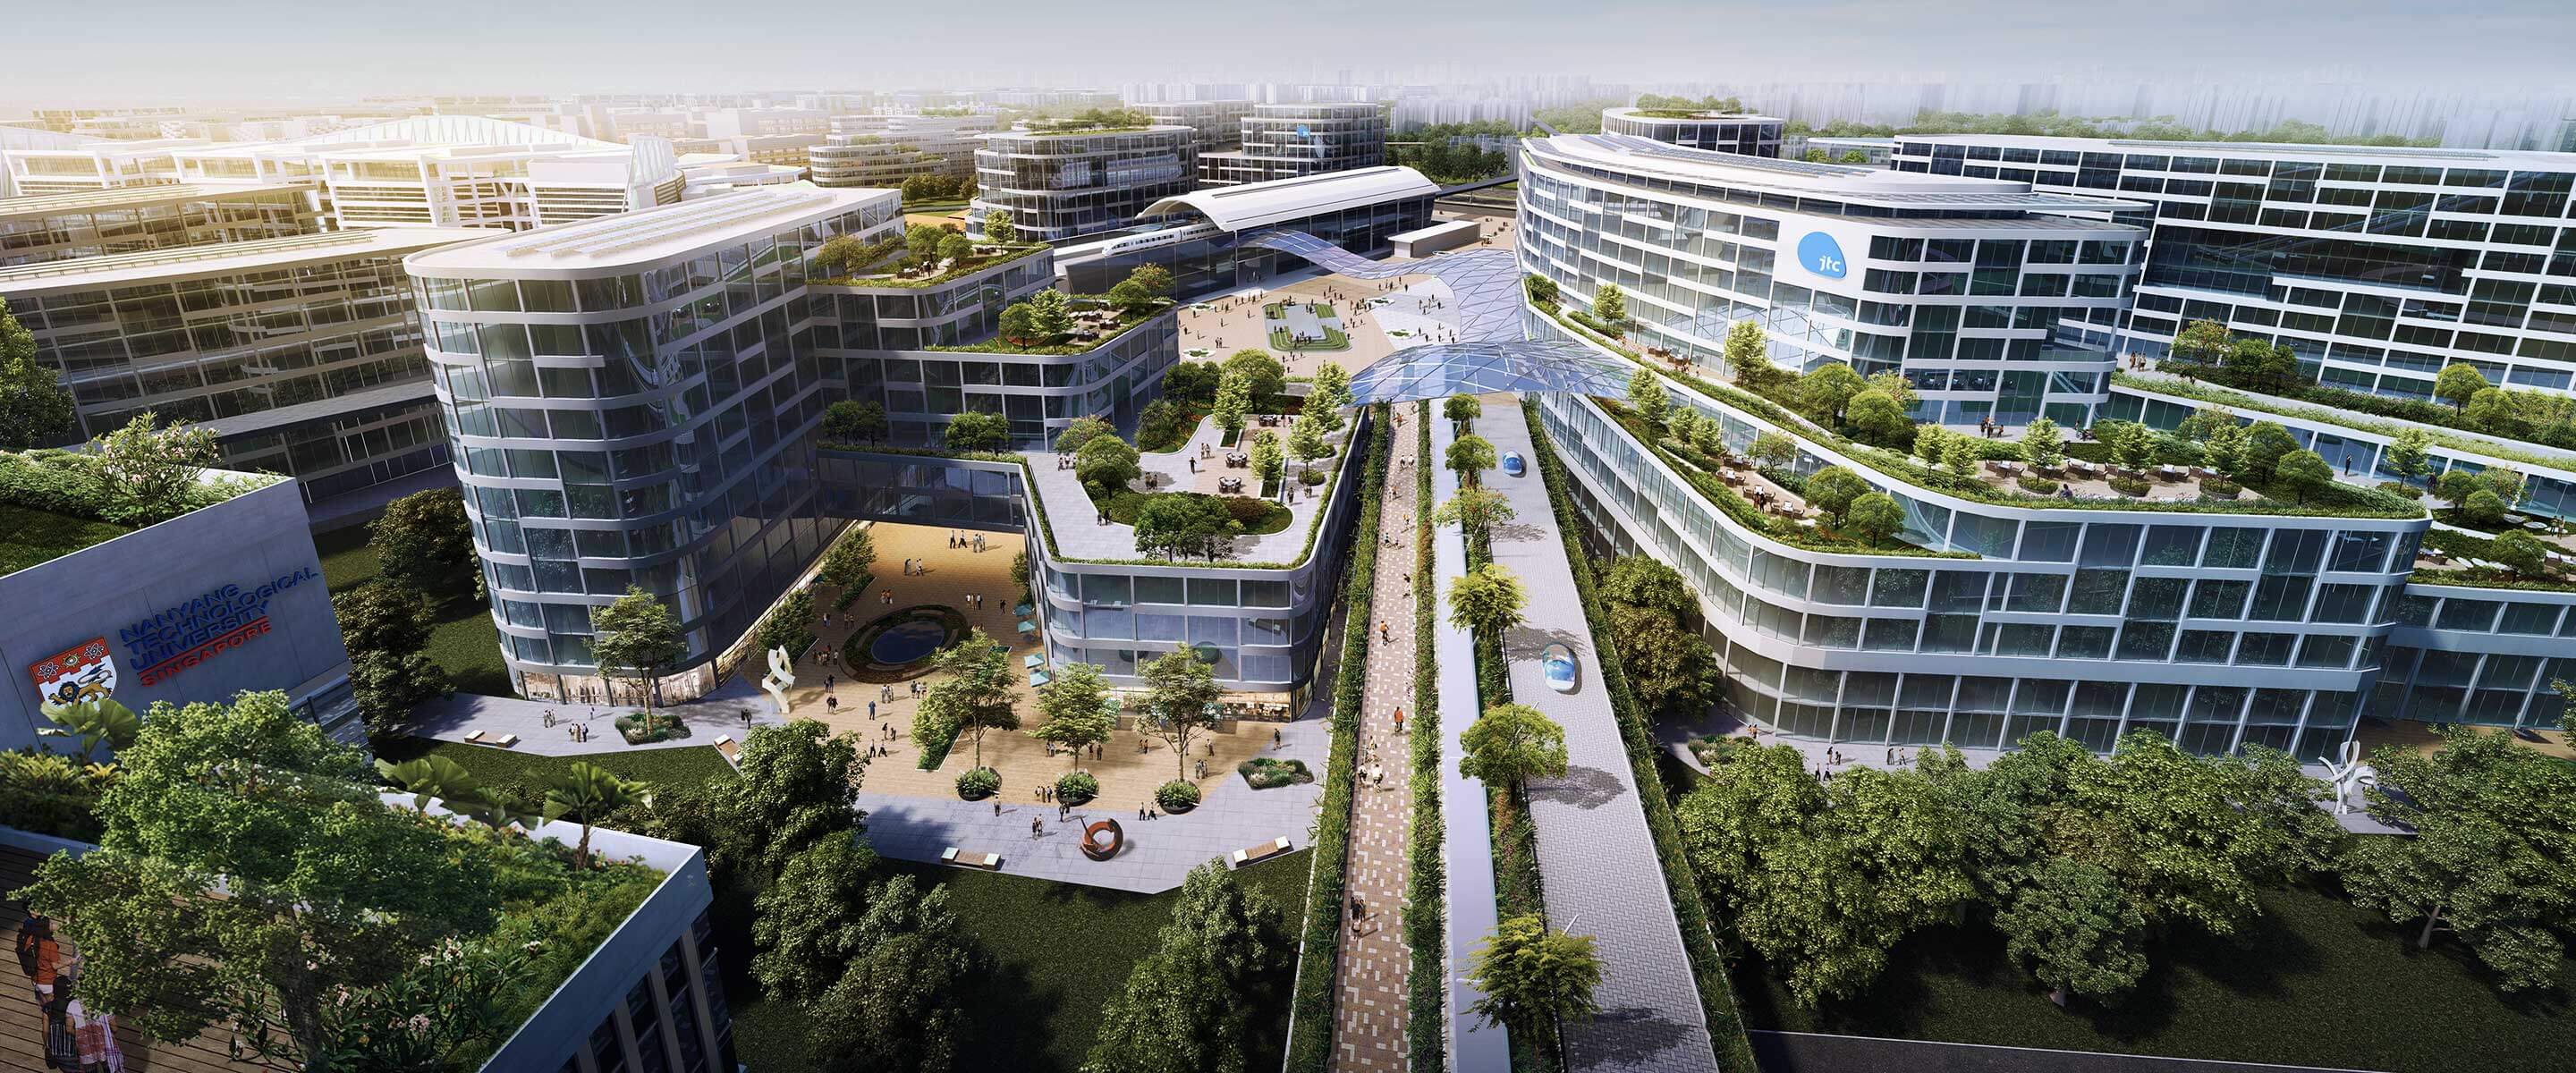 An artist's impression of Jurong Innovation District, an industrial estate with green spaces